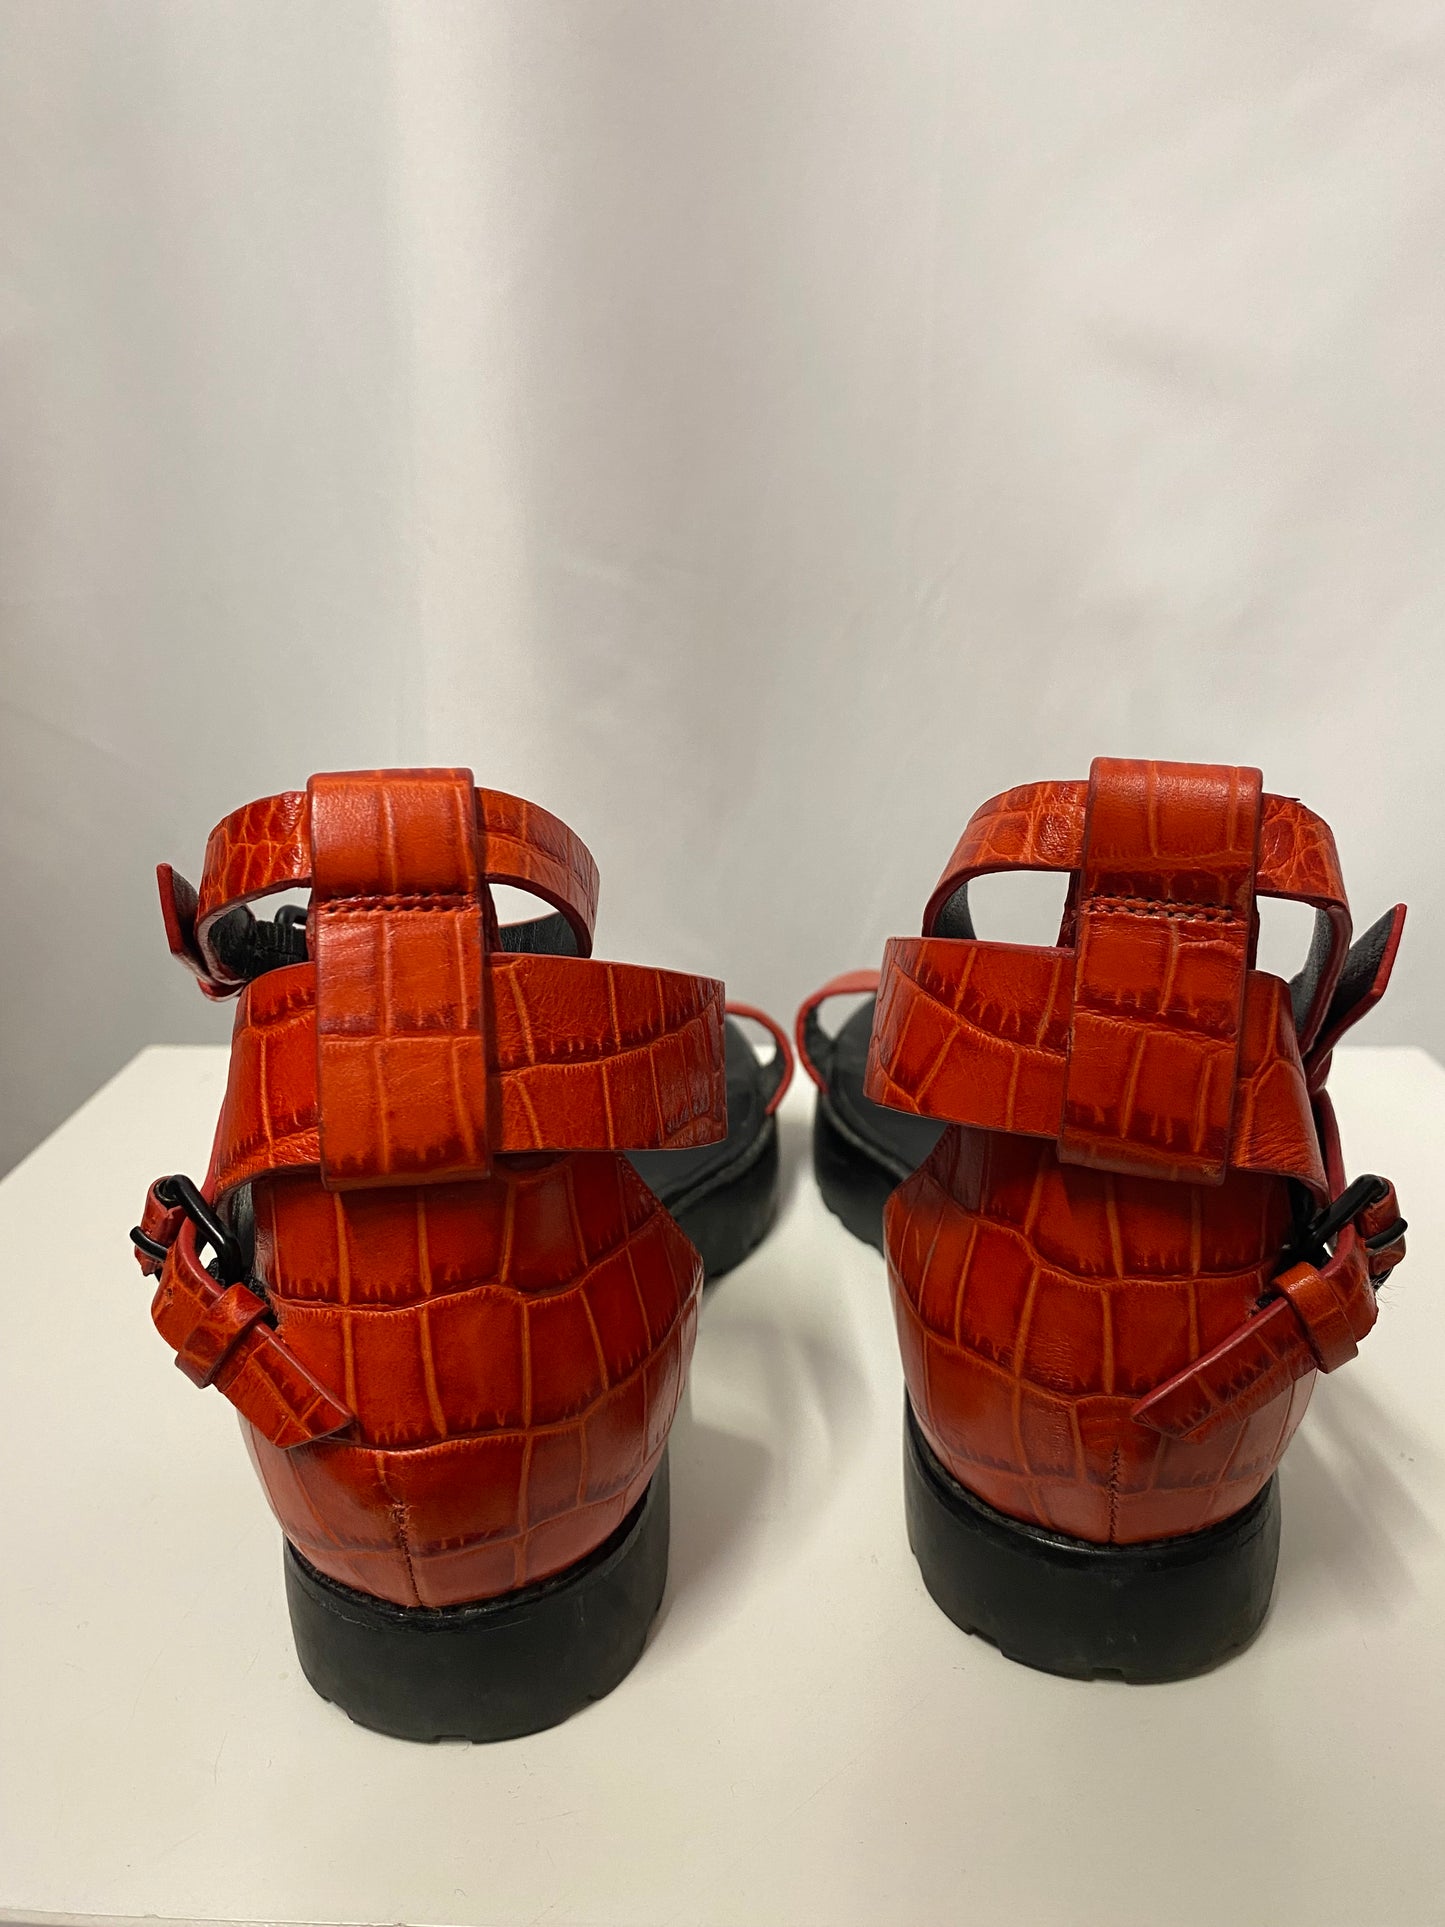 Alexander Wang Red Crocodile Pointed Strappy Sandals 3.5